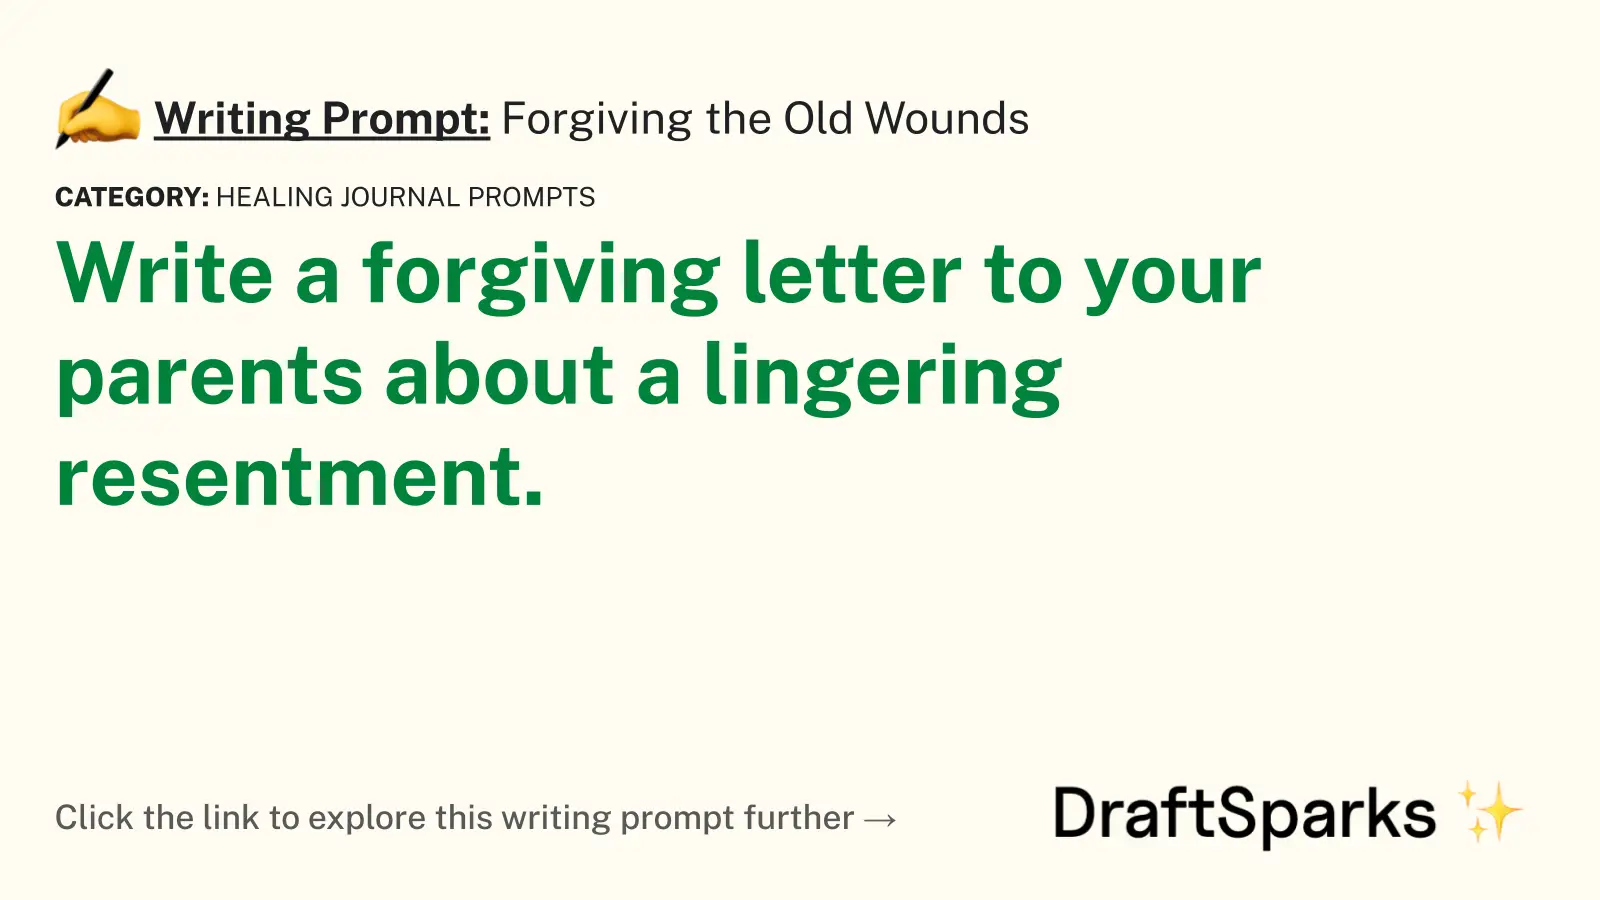 Forgiving the Old Wounds